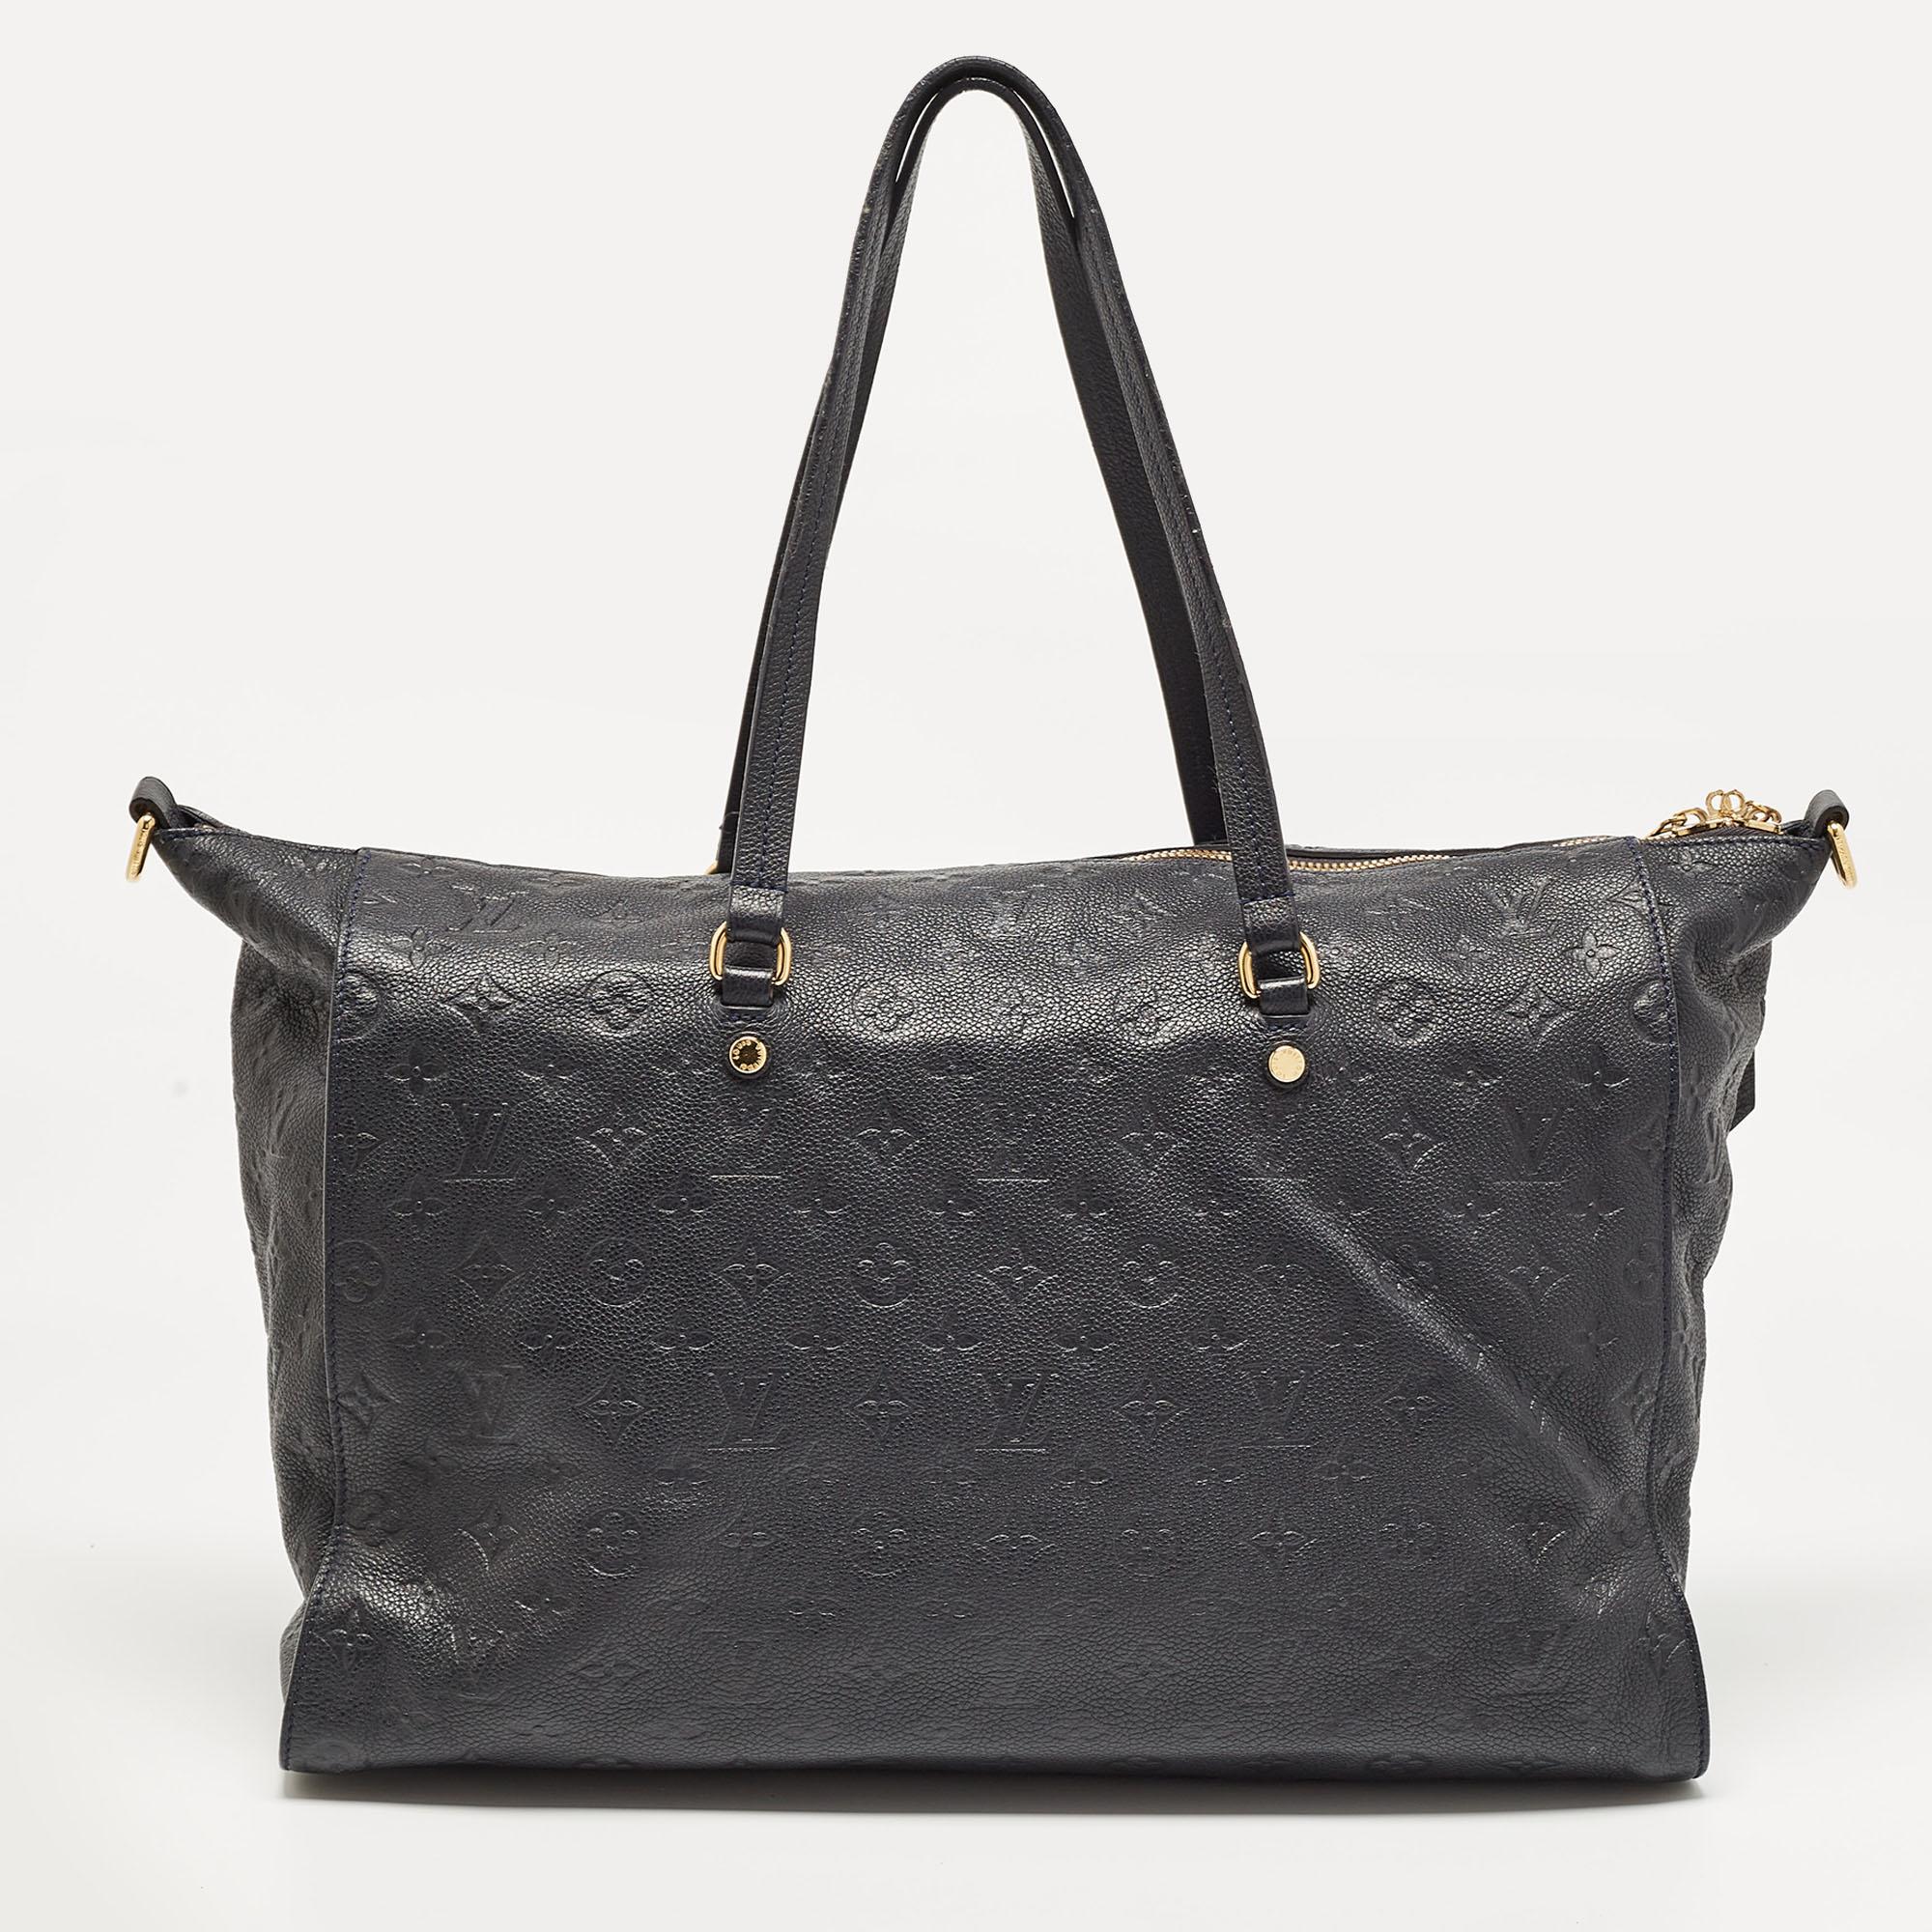 Louis Vuitton's creations are popular owing to their high style and functionality. This bag, like all the other handbags, is durable and stylish. Exuding a fine finish, the bag is designed to give a luxurious experience. The interior has enough